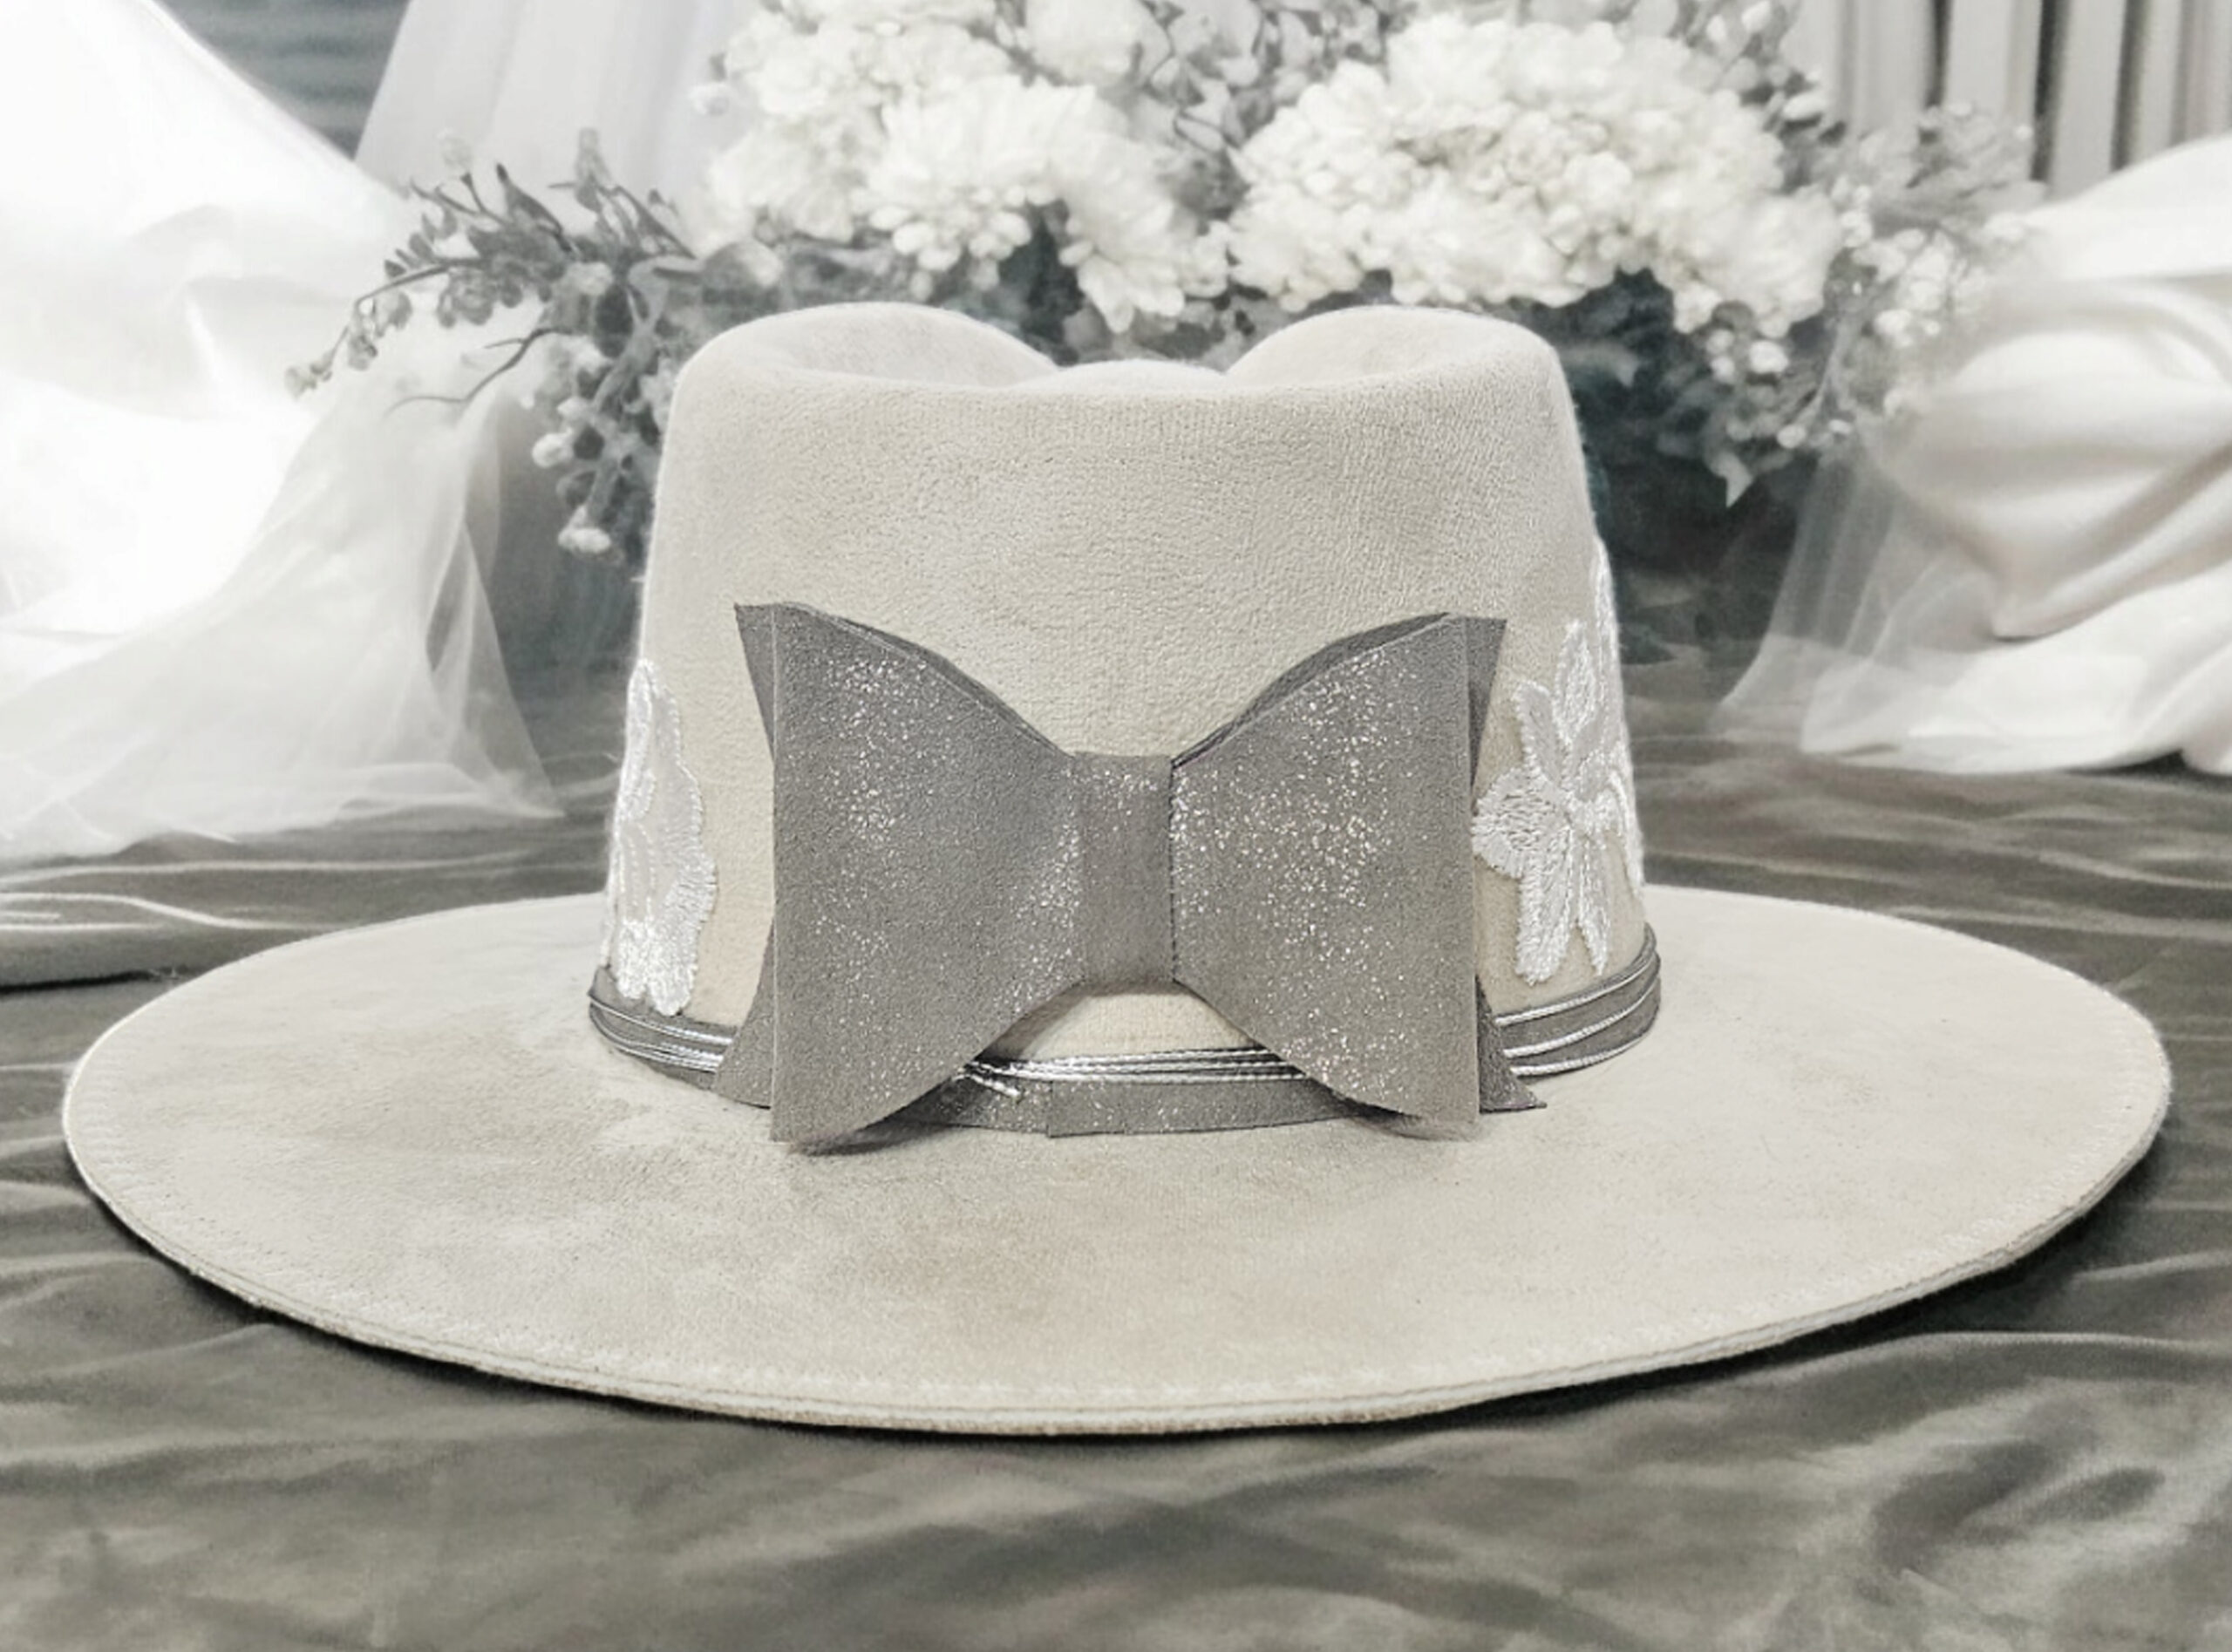 bridalhat white hat with lace and silver leather bow